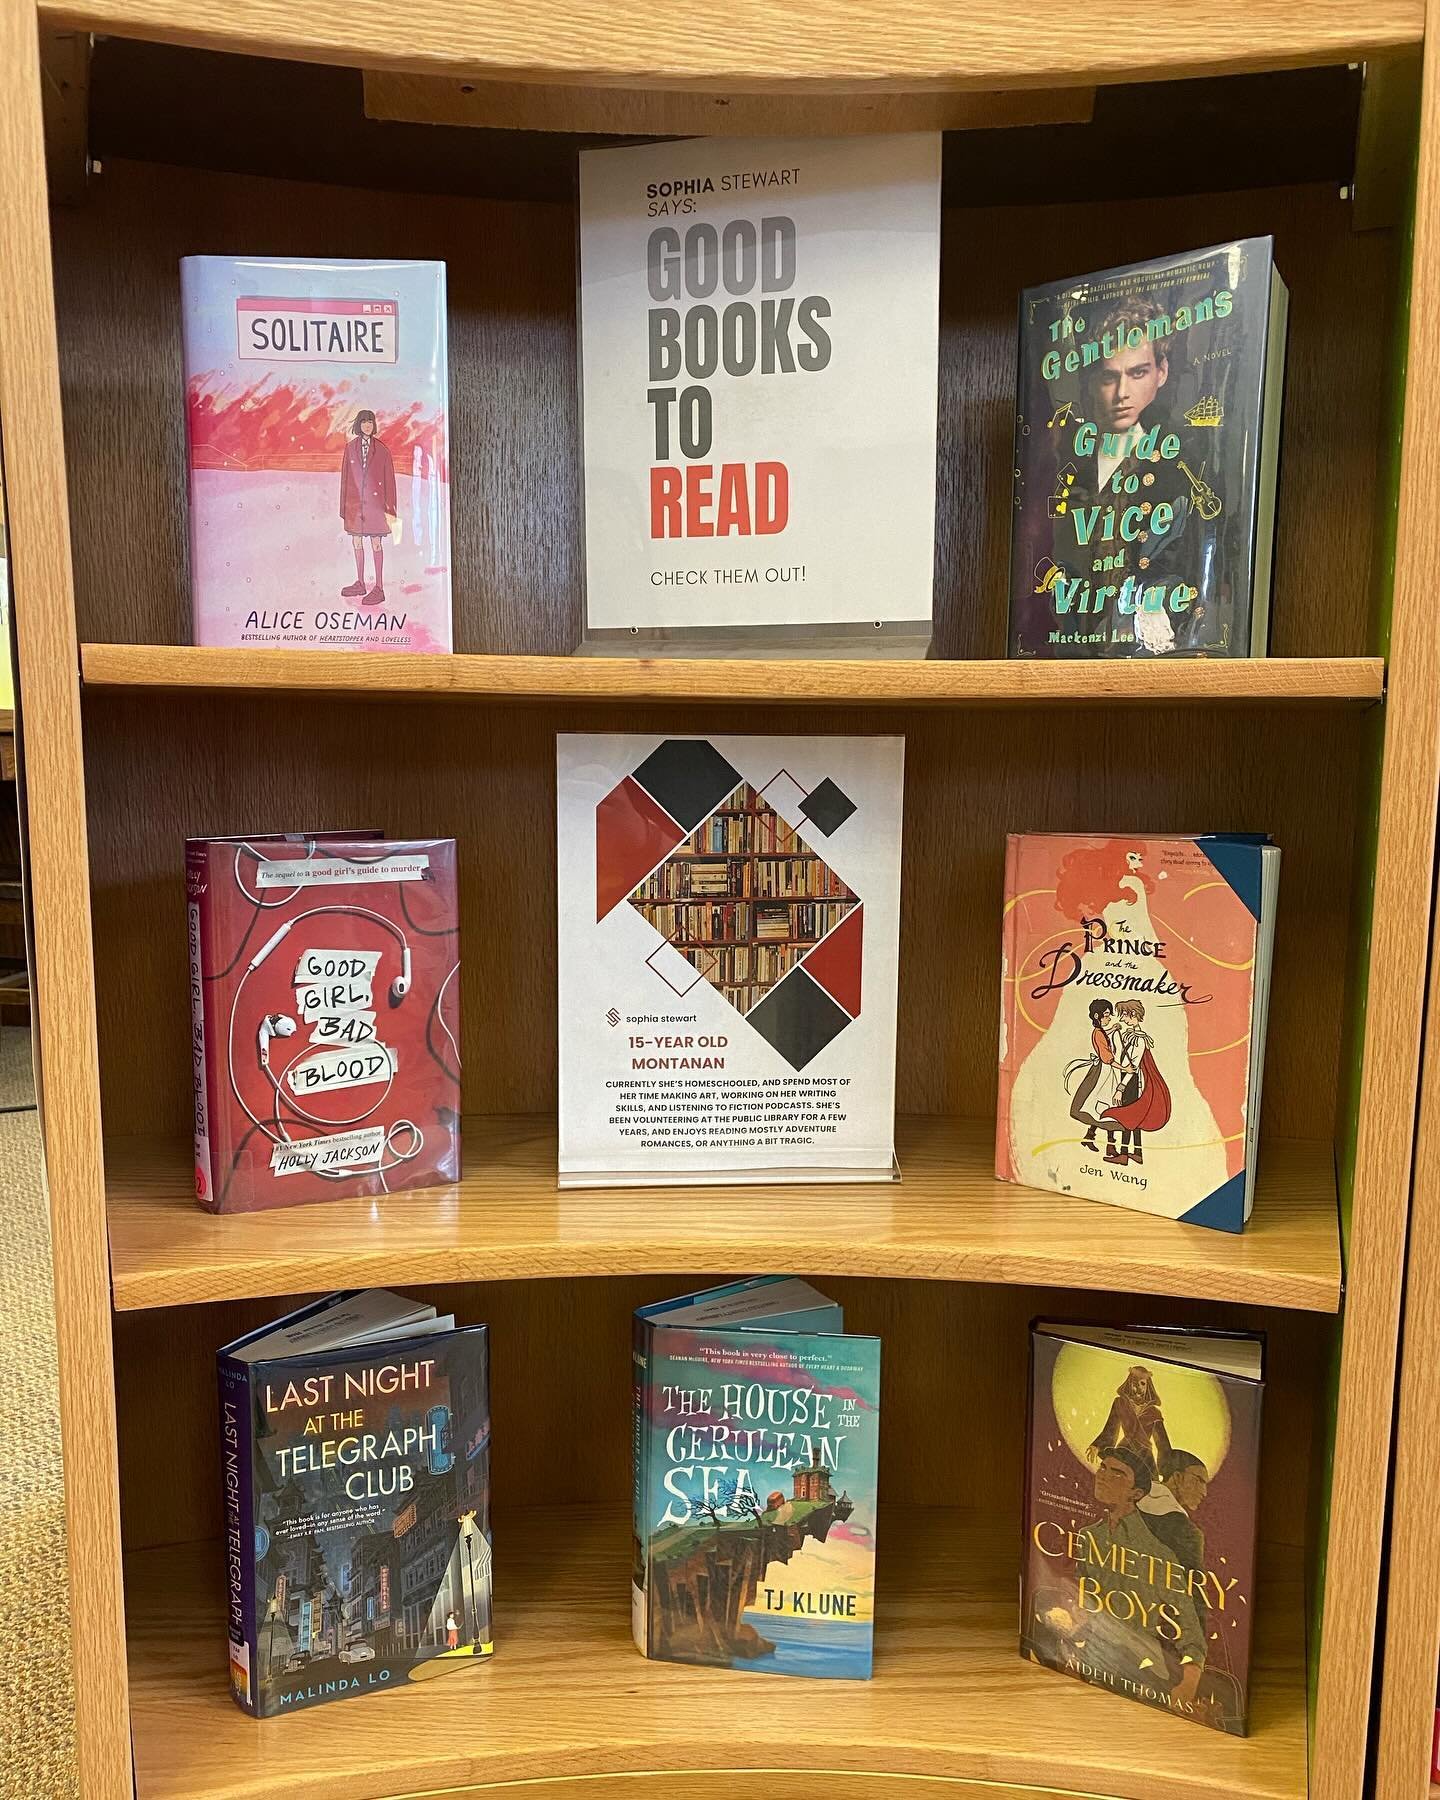 ~Today Is~

Today is the launch of our Reader Advisory displays!

The Young Adult recommendations come from local teen Sophia Stewart. #checkout what she selected to put on the shelf.

The Adult recommendations come from Wendy Kamm. Long-time local, 